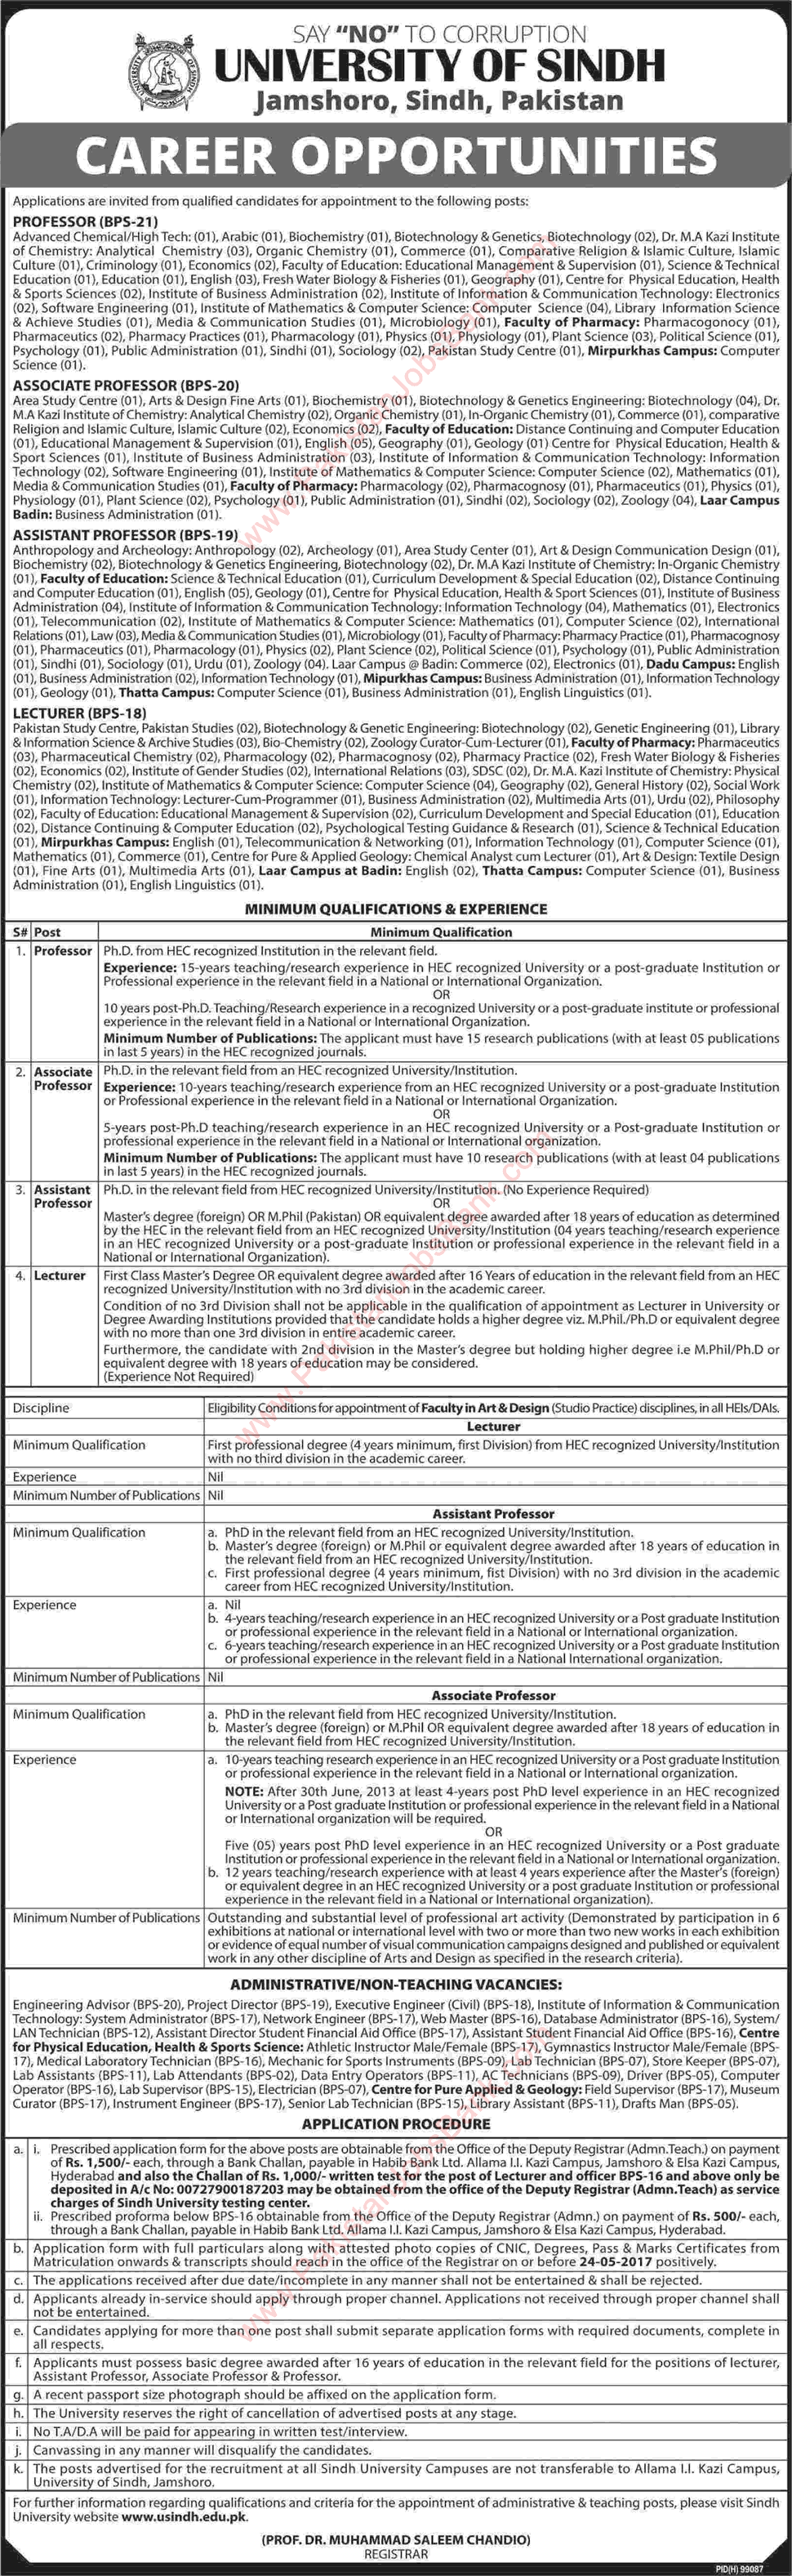 University of Sindh Jamshoro Jobs 2017 April / May Teaching Faculty, Admin Staff & Others Latest